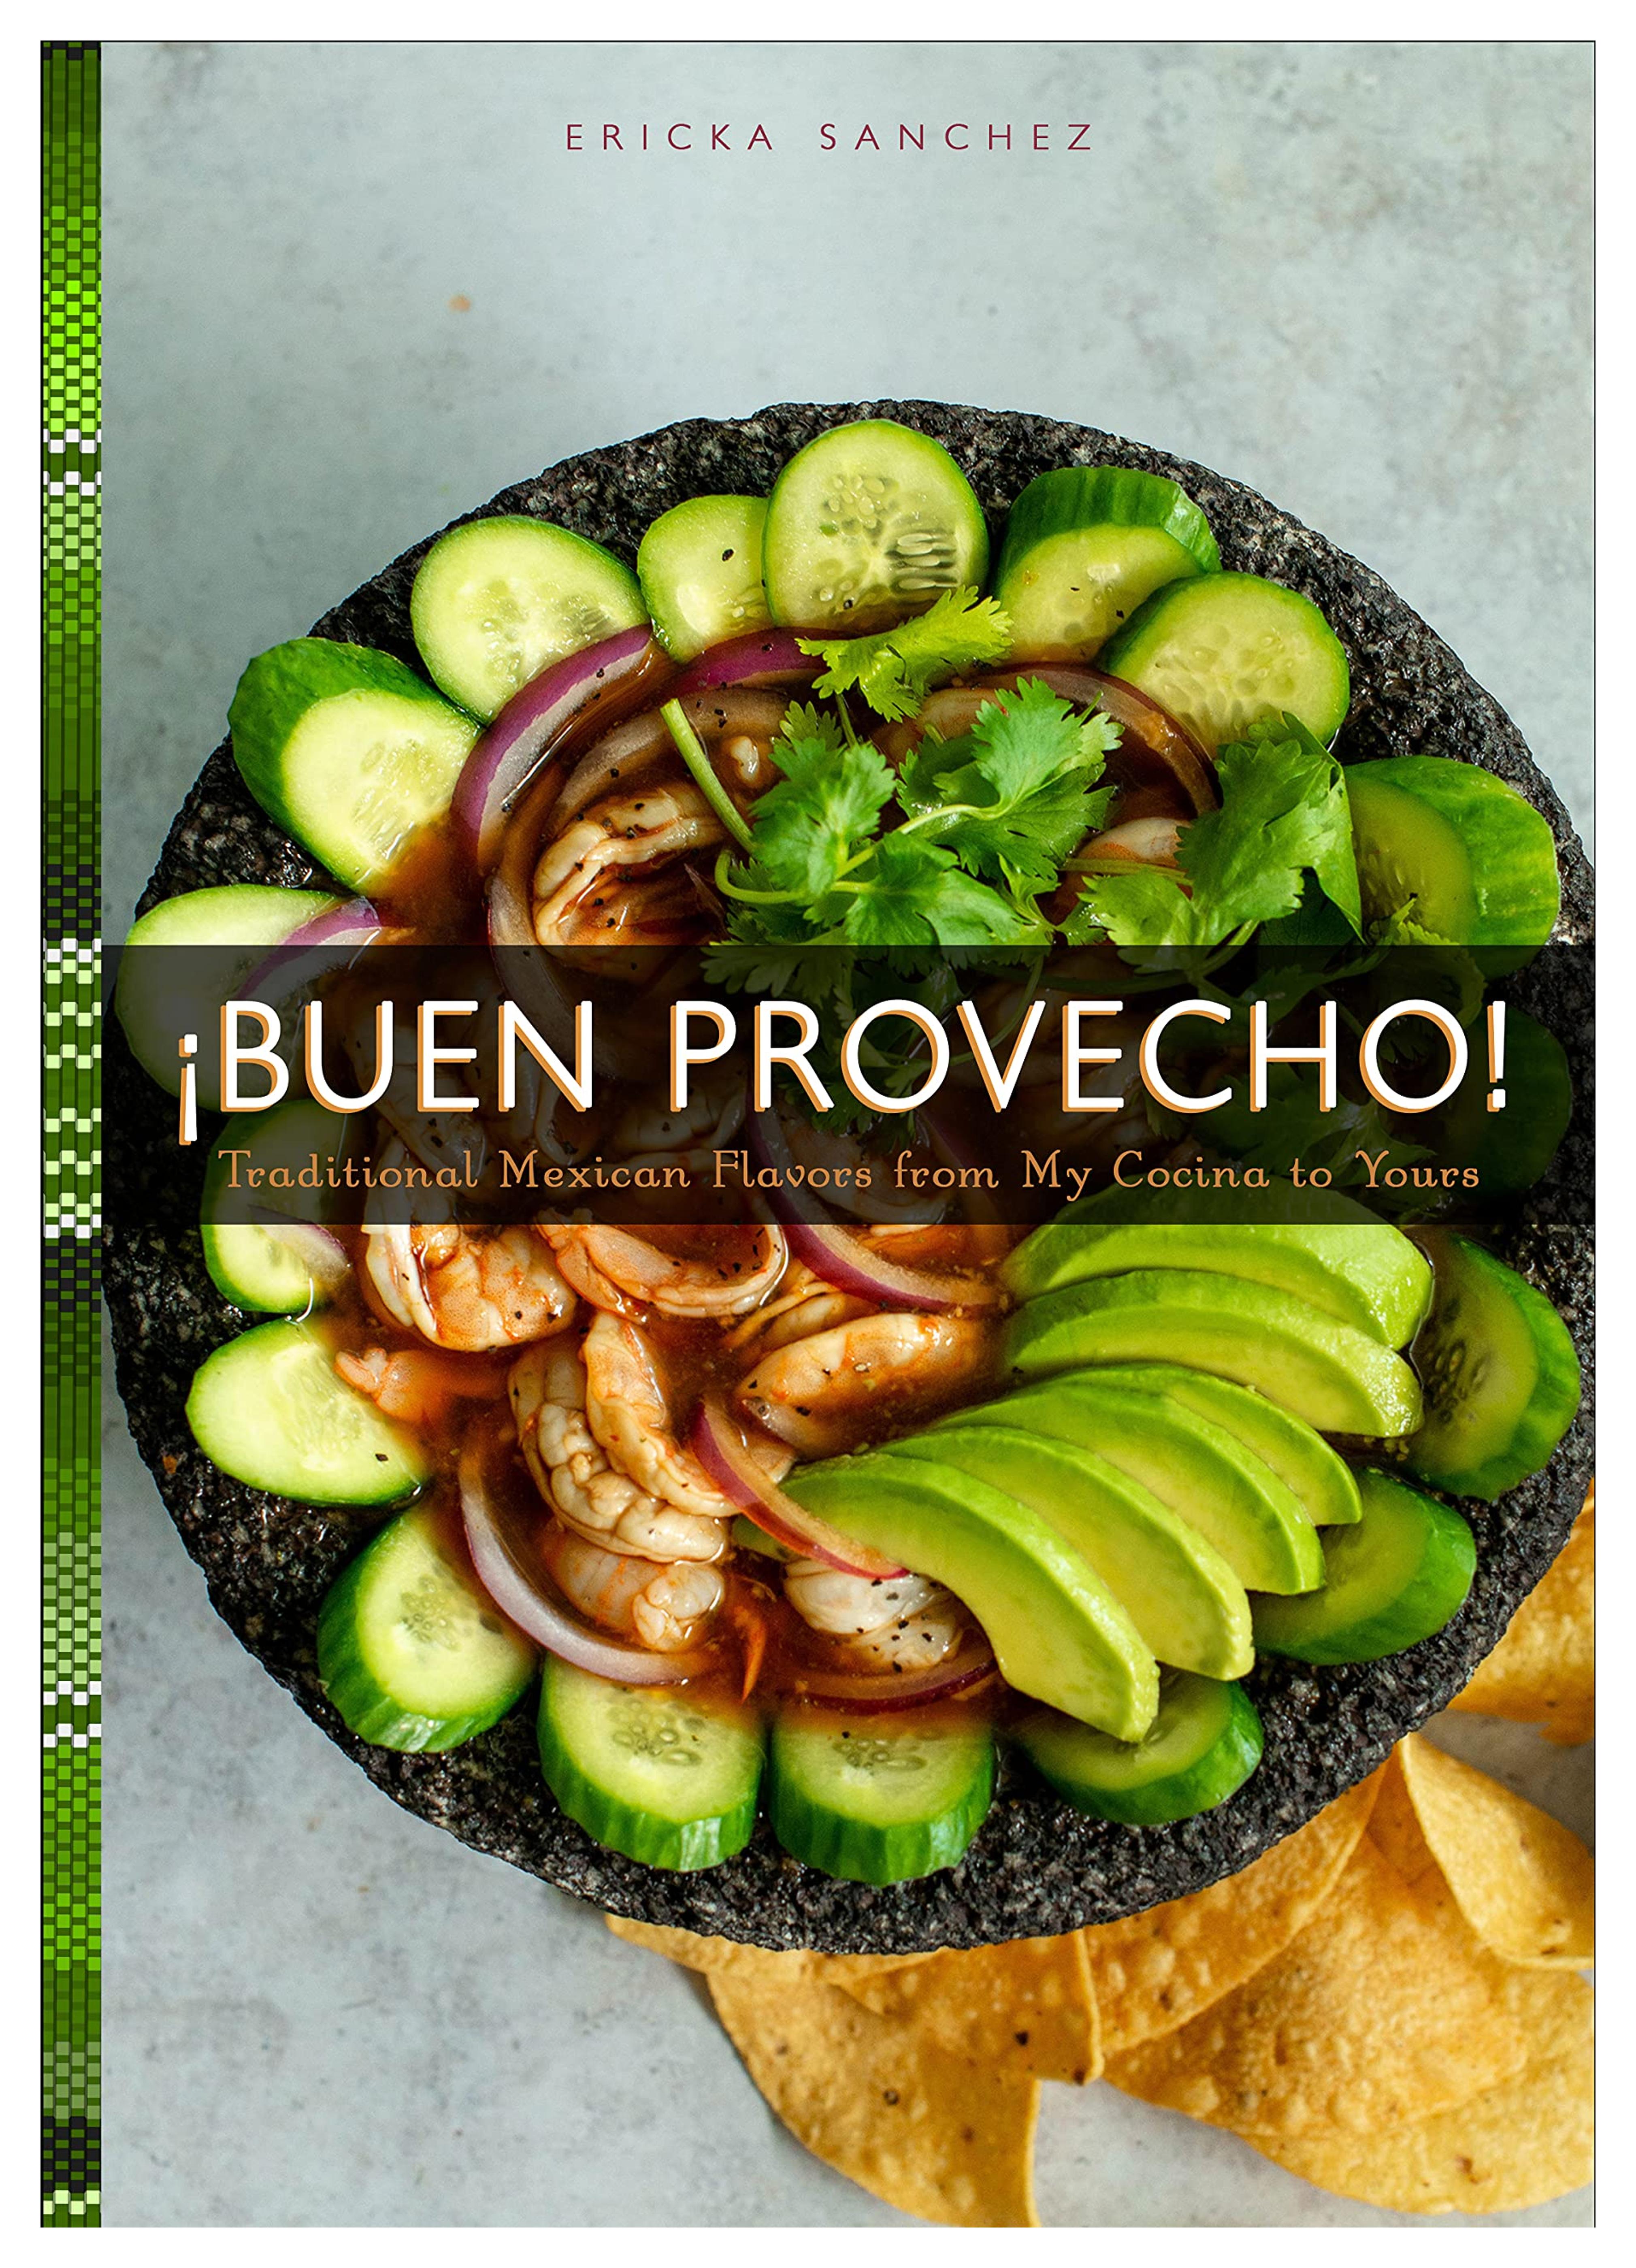 ¡Buen Provecho!: Traditional Mexican Flavors from My Cocina to Yours: Sanchez, Ericka: 9781641705653: Amazon.com: Books